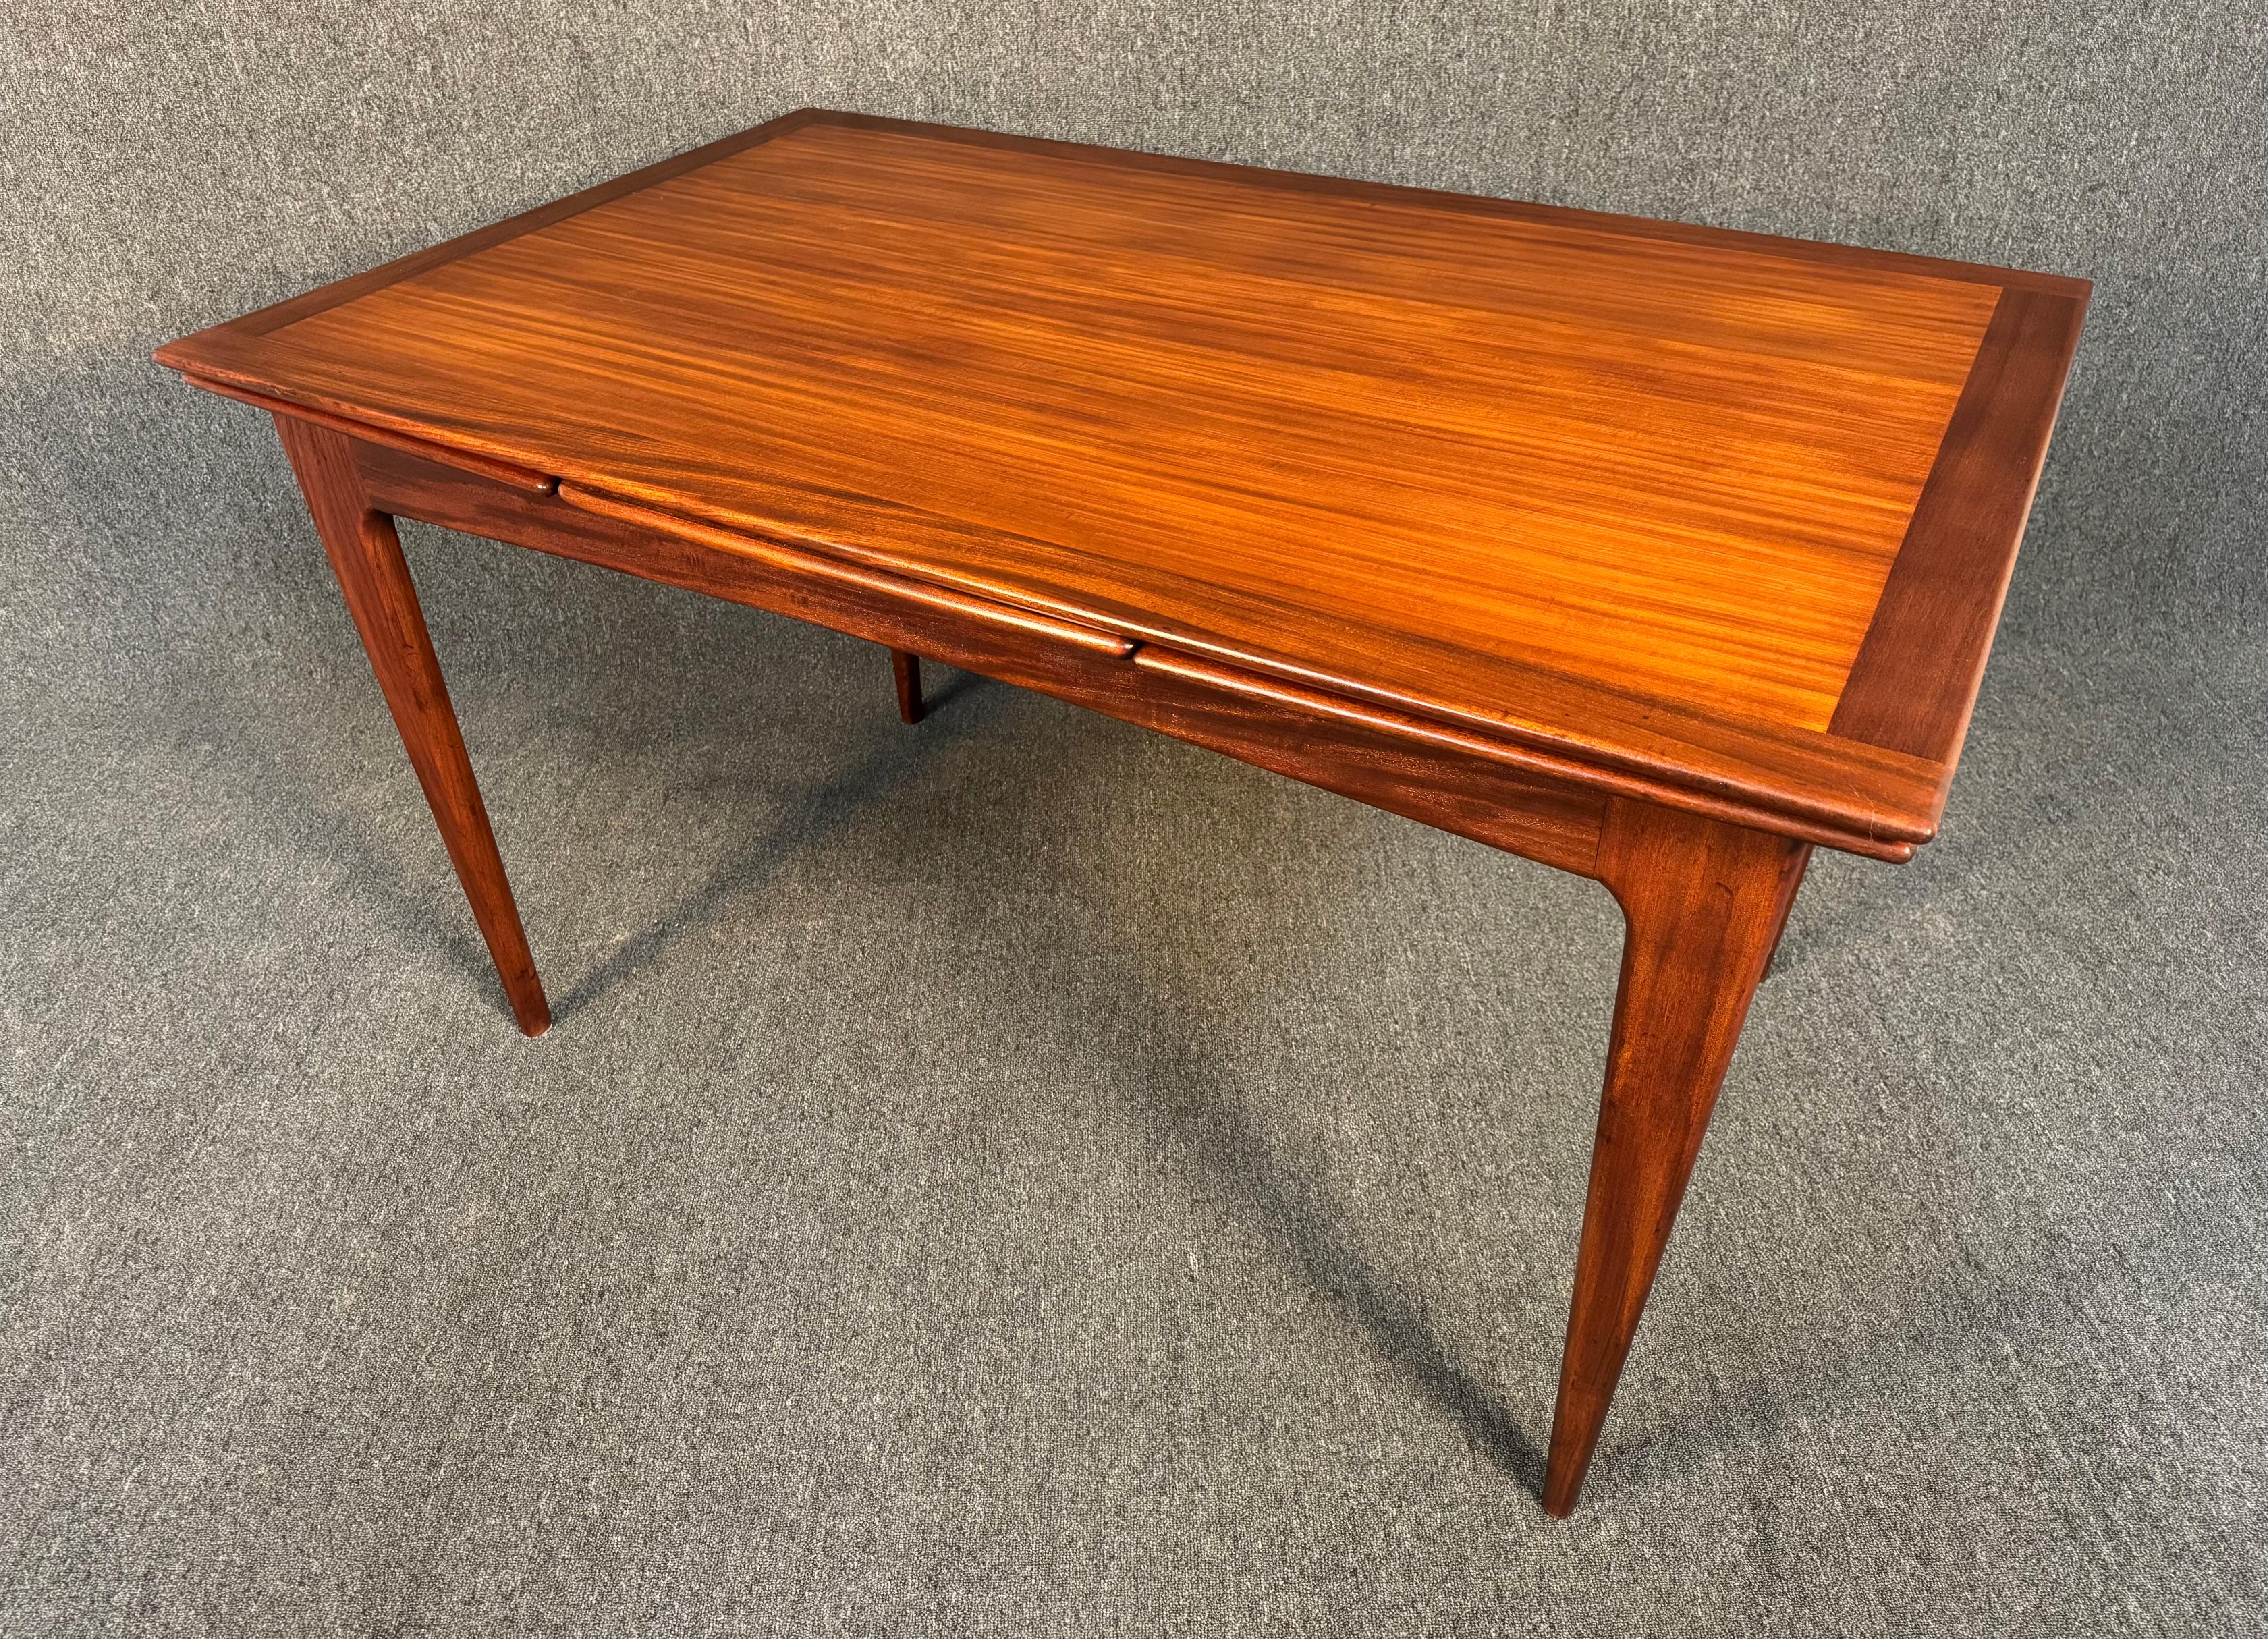 Vintage British Mid Century Modern Afromasia Teak Dining Table by A. Younger Ltd For Sale 3